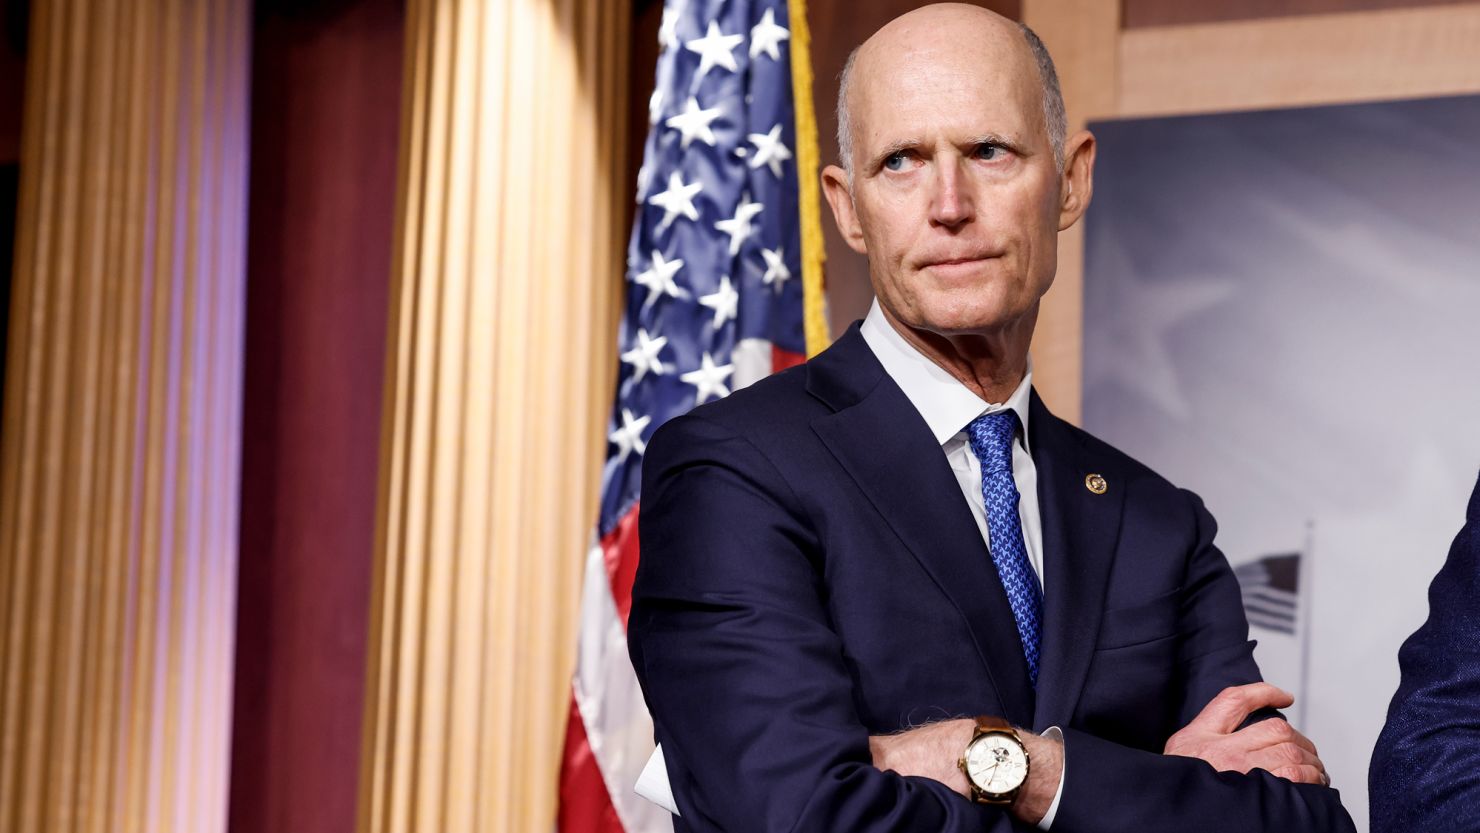 Sen. Rick Scott listens during a news conference at the Capitol Building on January 25 in Washington.